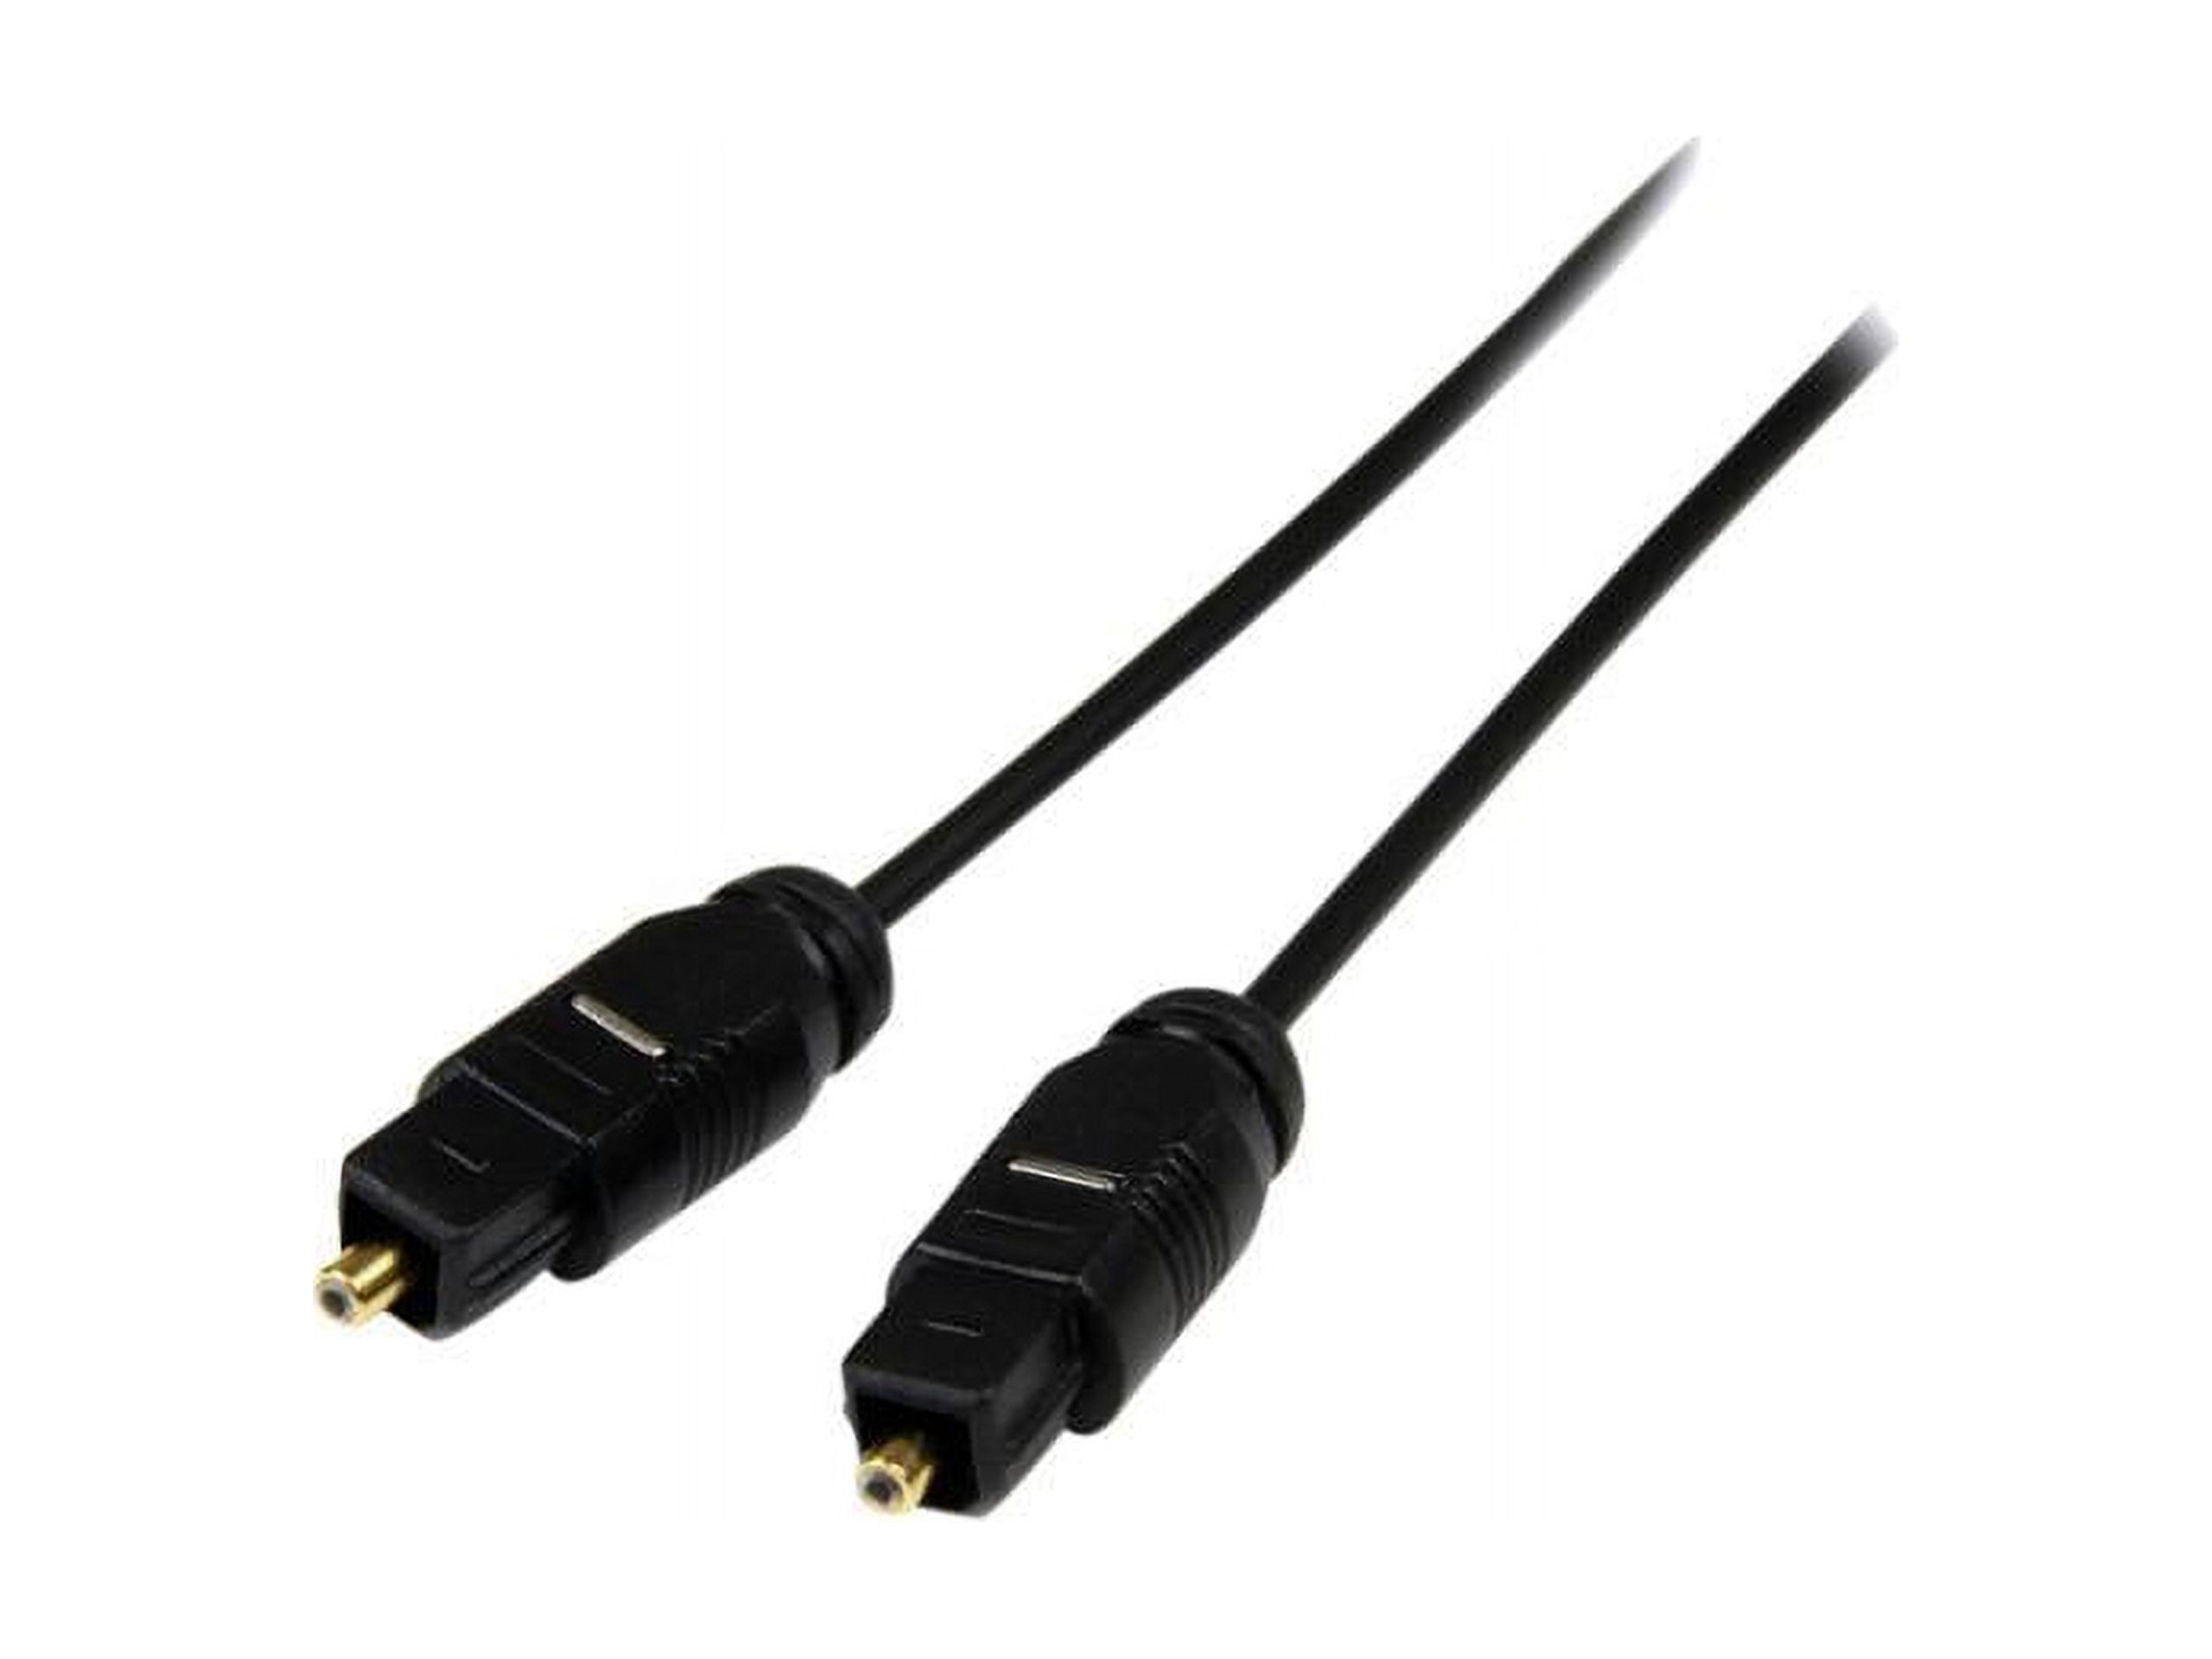 StarTech.com 15 ft Thin Toslink Digital Optical SPDIF Audio Cable - image 1 of 2